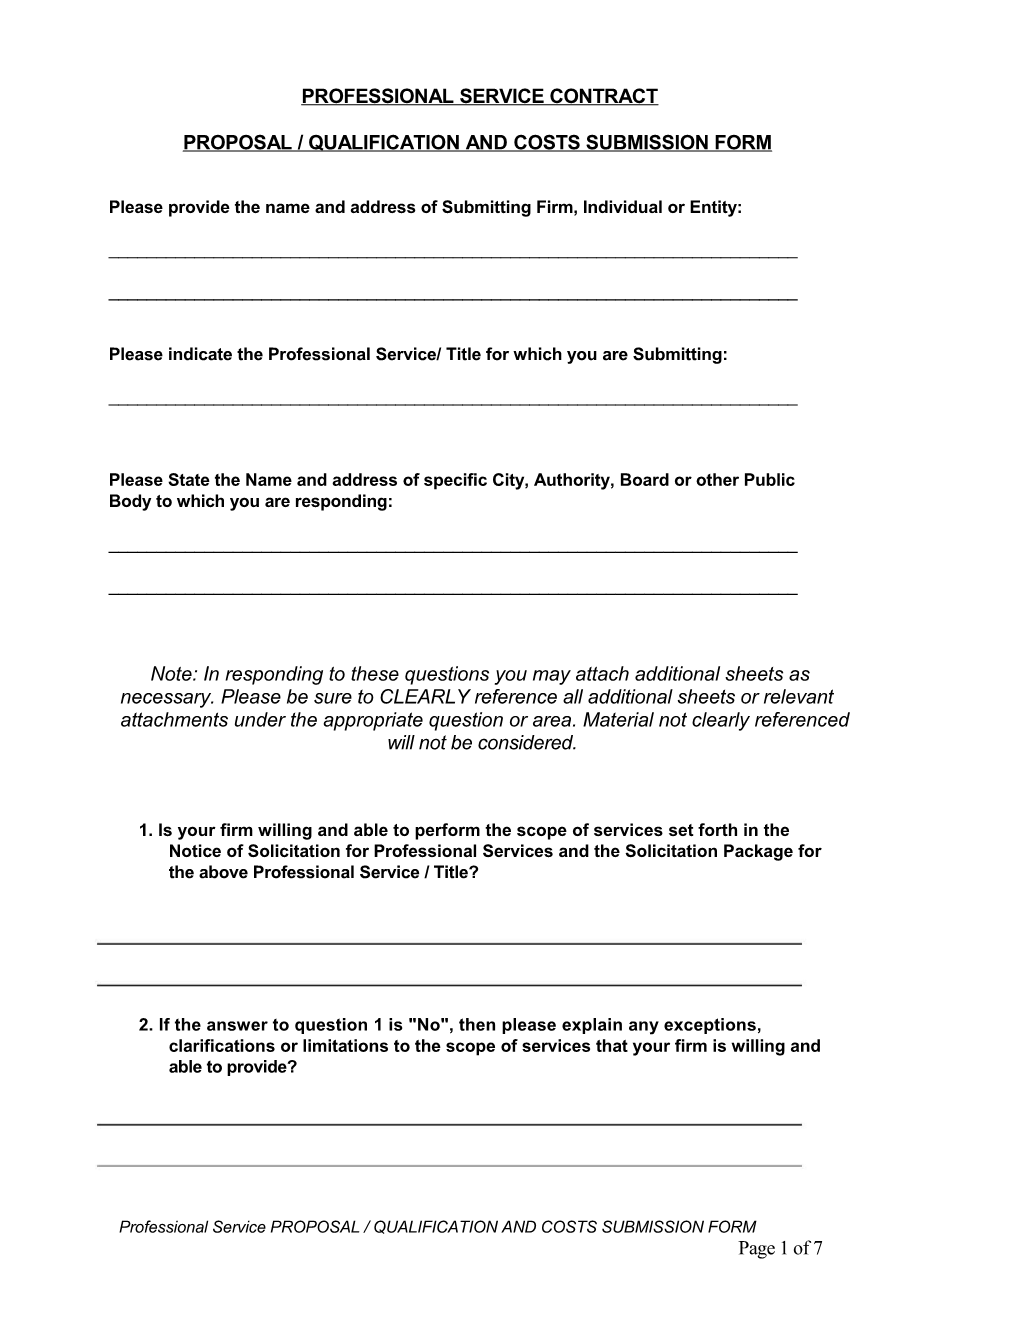 Proposal / Qualification and Costs Submission Form